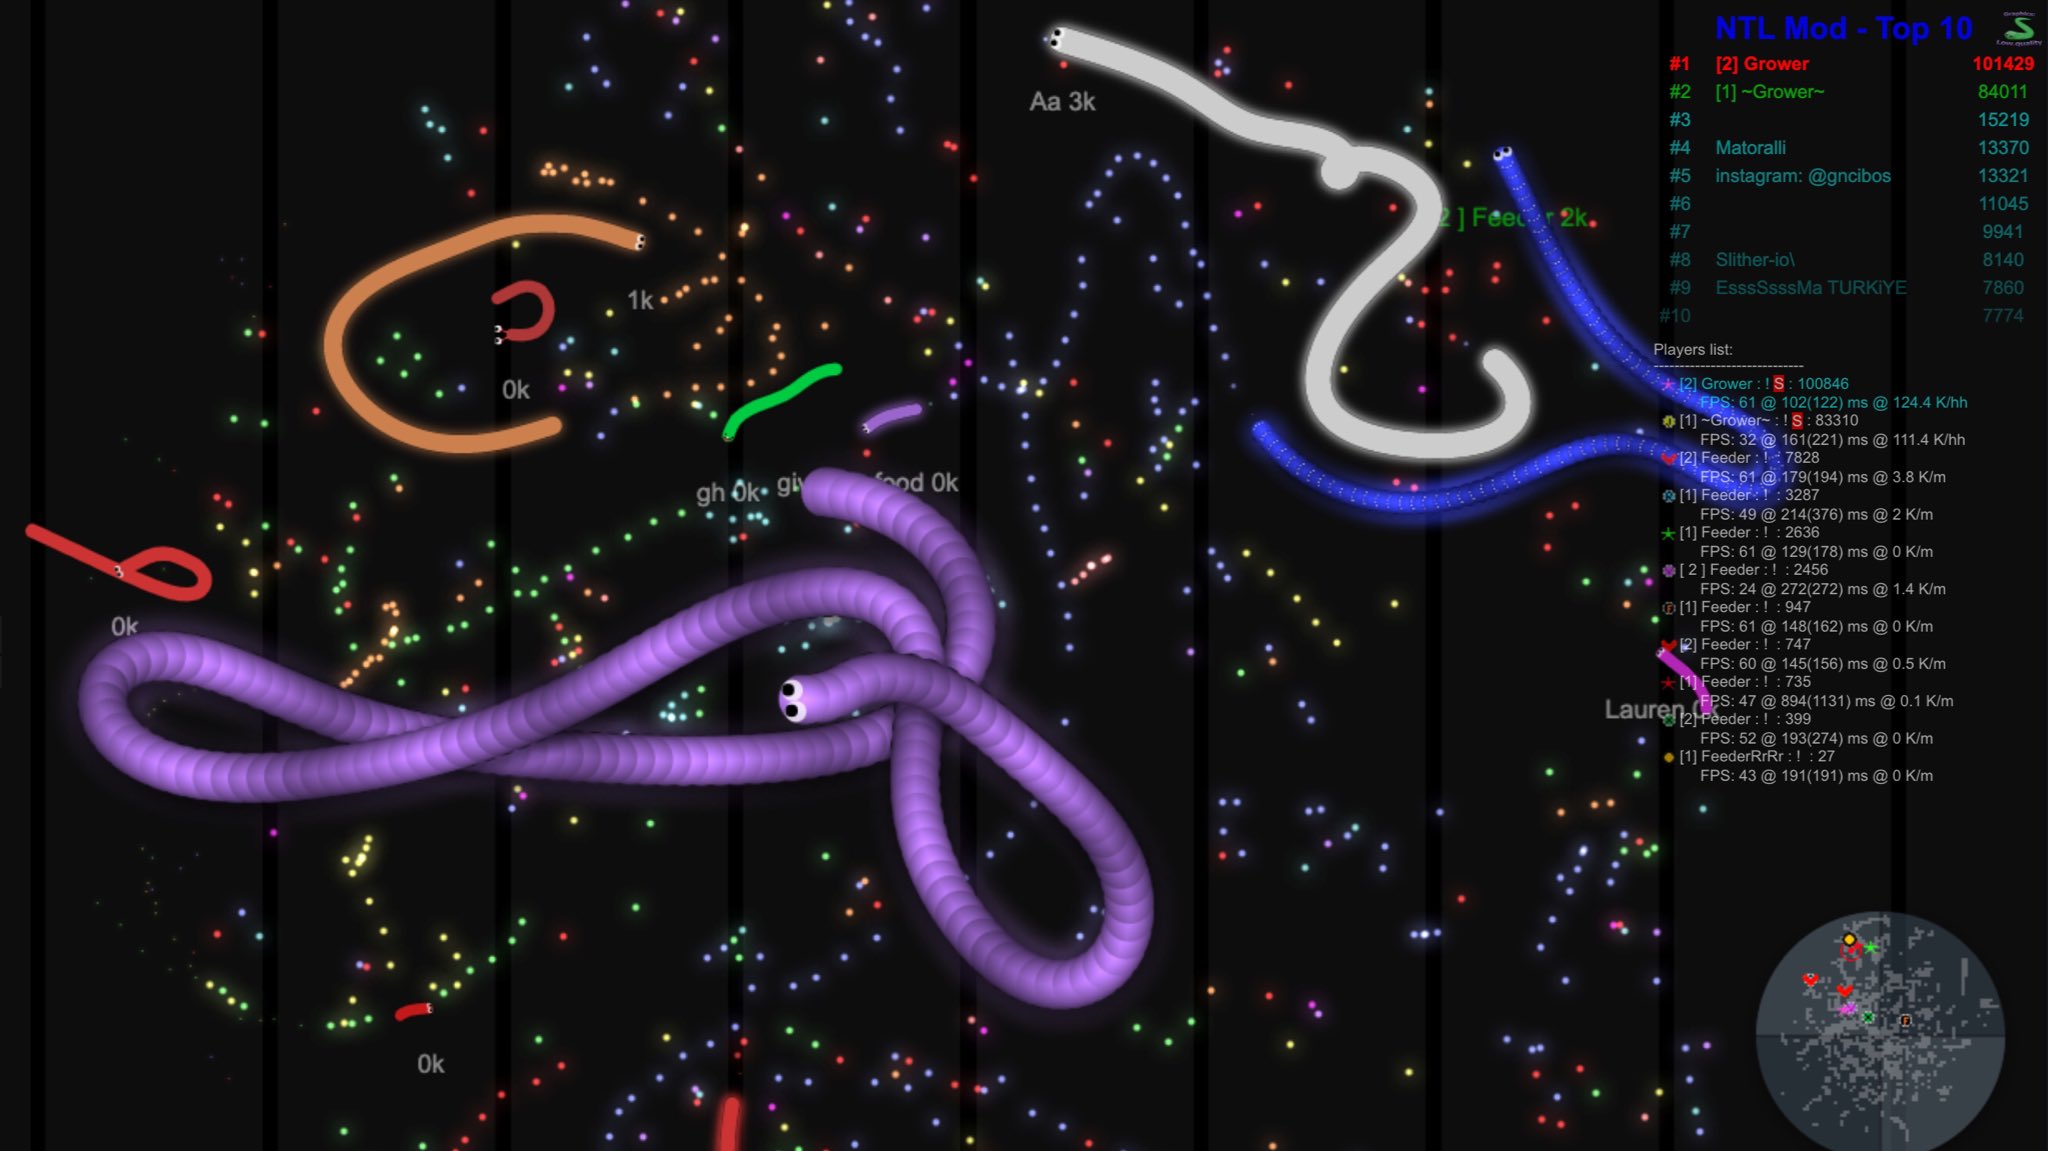 NTL MOD for Slither.io